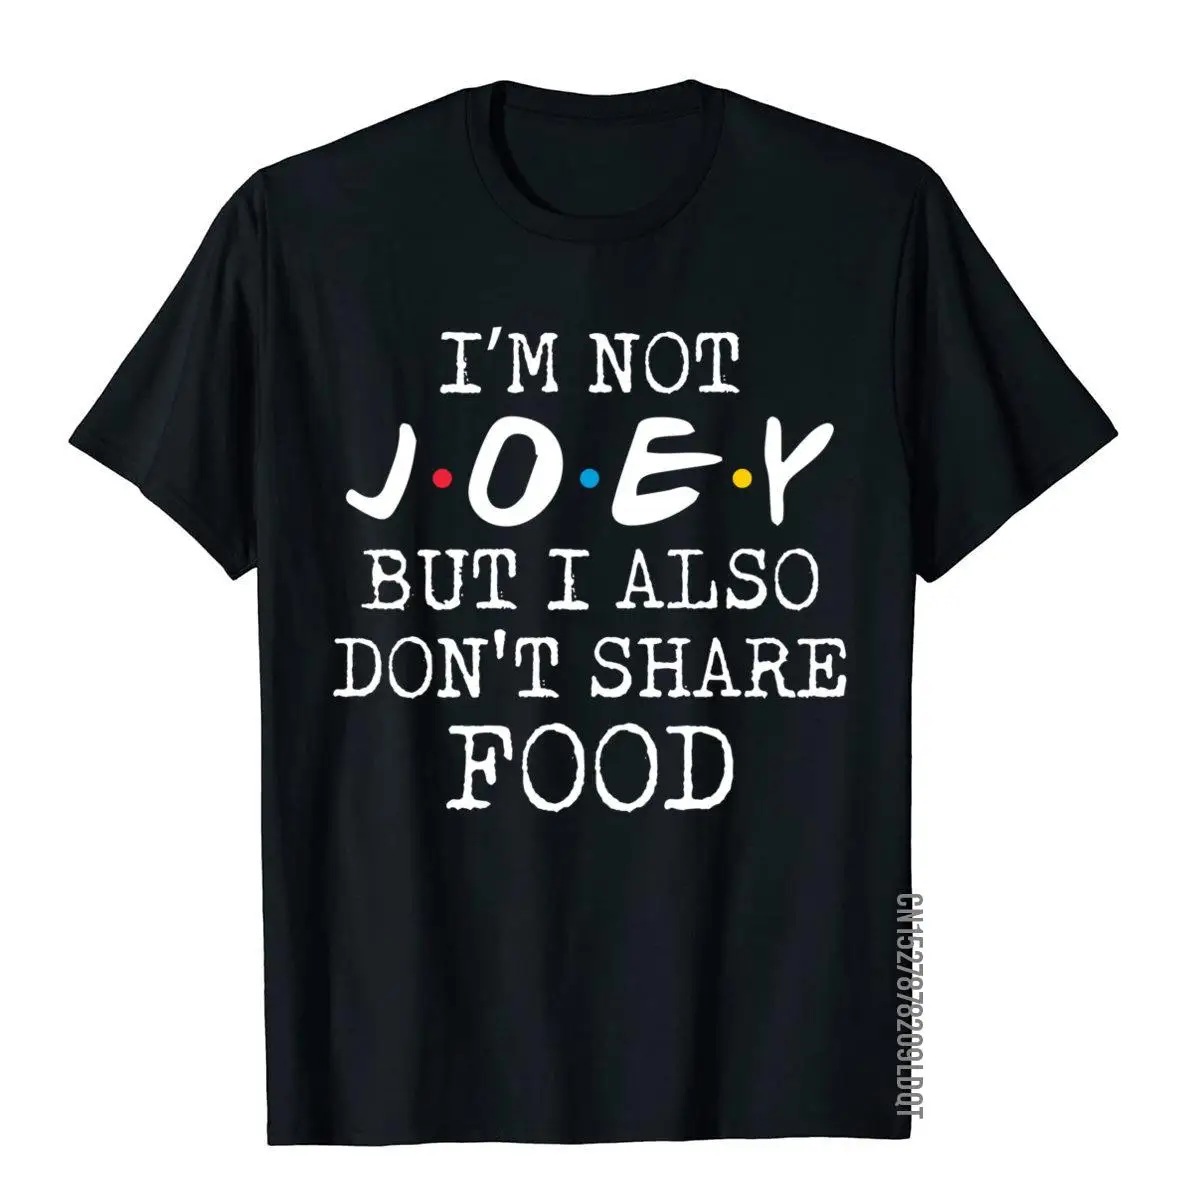 

Joey Doesn't Share Food Gift For Joe Funny Josephs T Shirt Tops Shirts Fitted Cotton Fitness Moto Biker Men